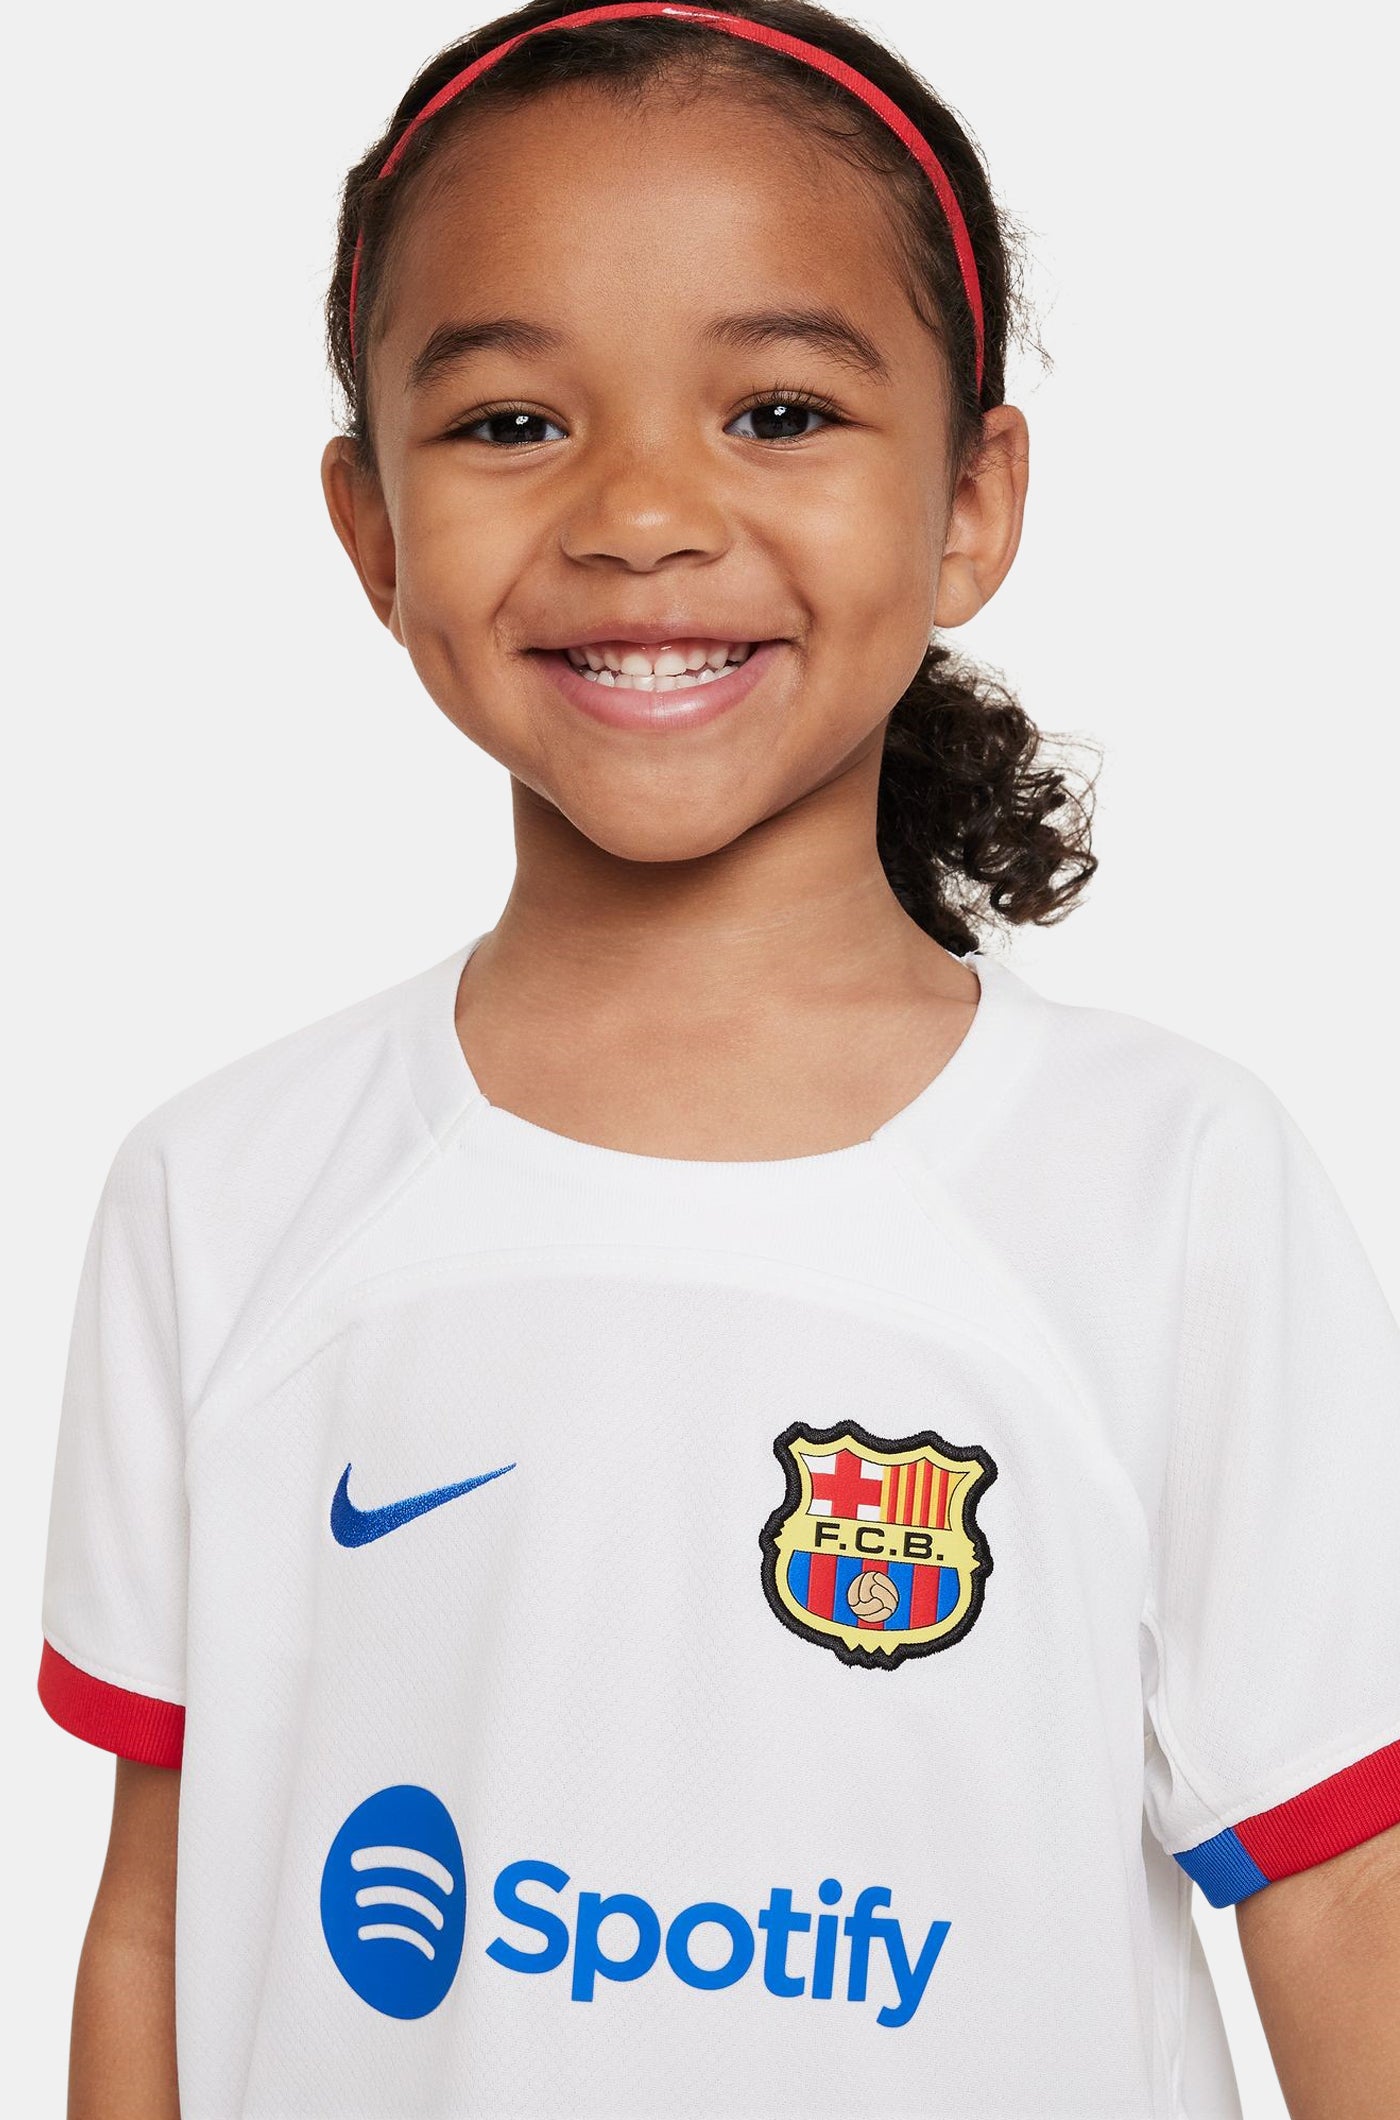 FC Barcelona away Kit 23/24 – Younger Kids  - PARALLUELO